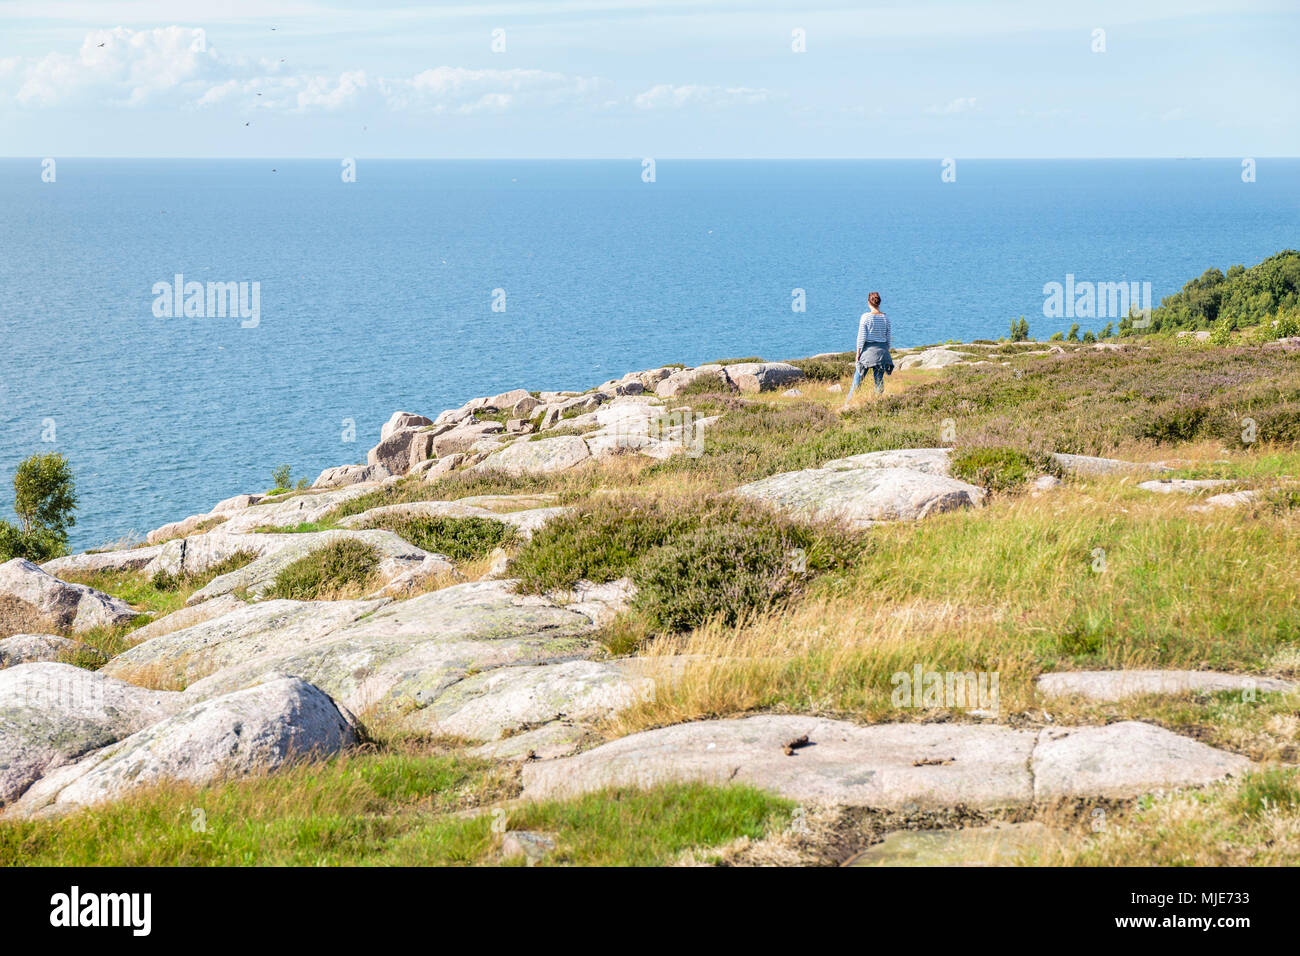 The Slotslyngen south of Hammershus, the Baltic Sea in the background, Europe, Denmark, Bornholm, Stock Photo